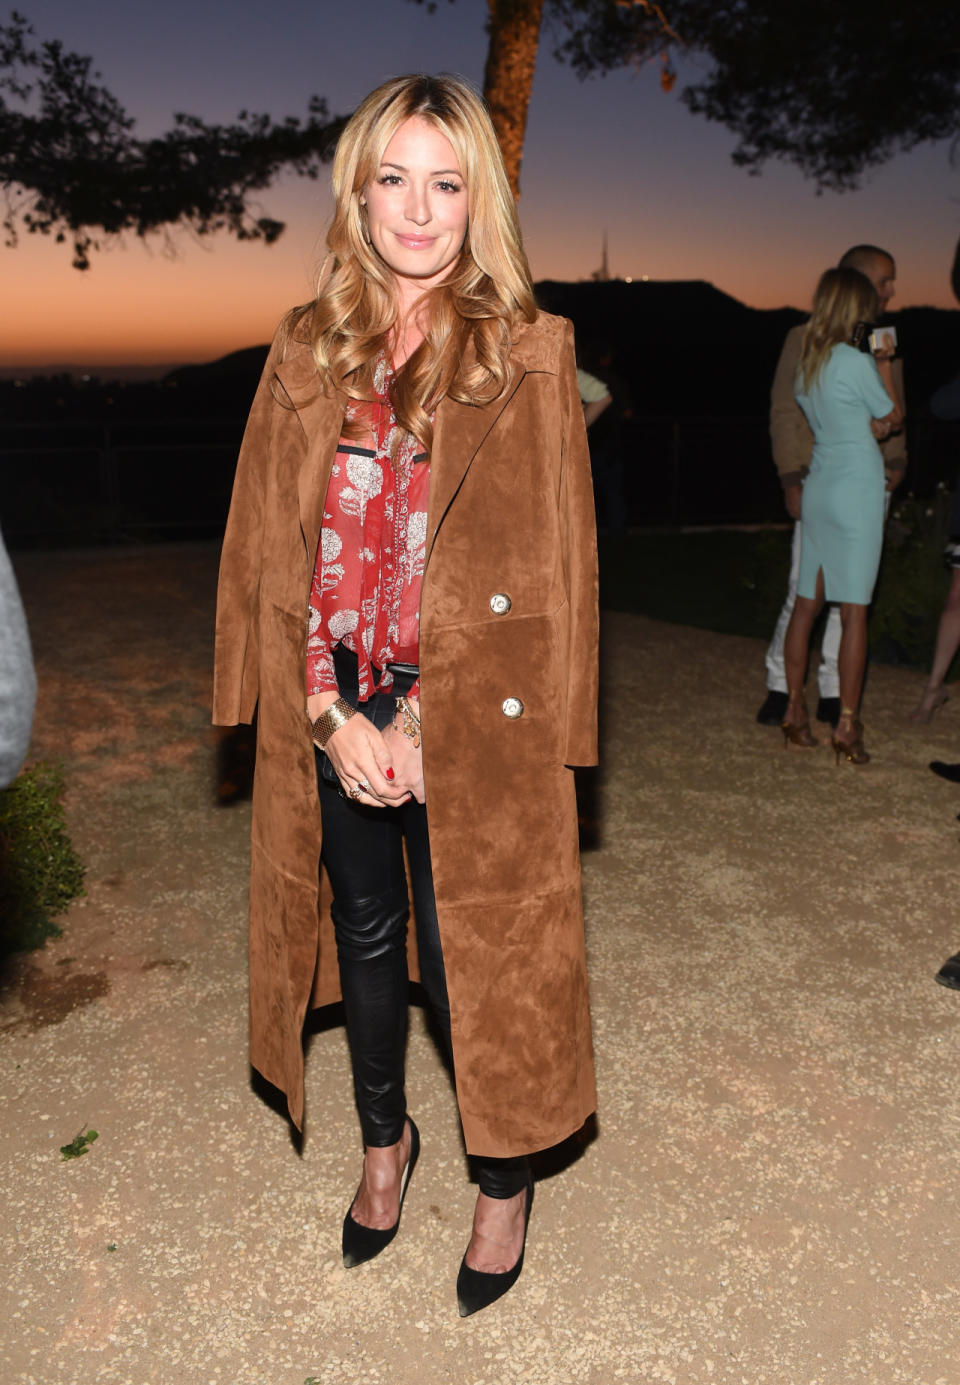 Temperatures might be warm in Los Angeles, but Cat Deeley, a Brit, has lived in the city long enough to know that they dip at night especially in the Hollywood Hills. She covered up and kept warm in leather pants, a floral blouse, and suede trench coat.